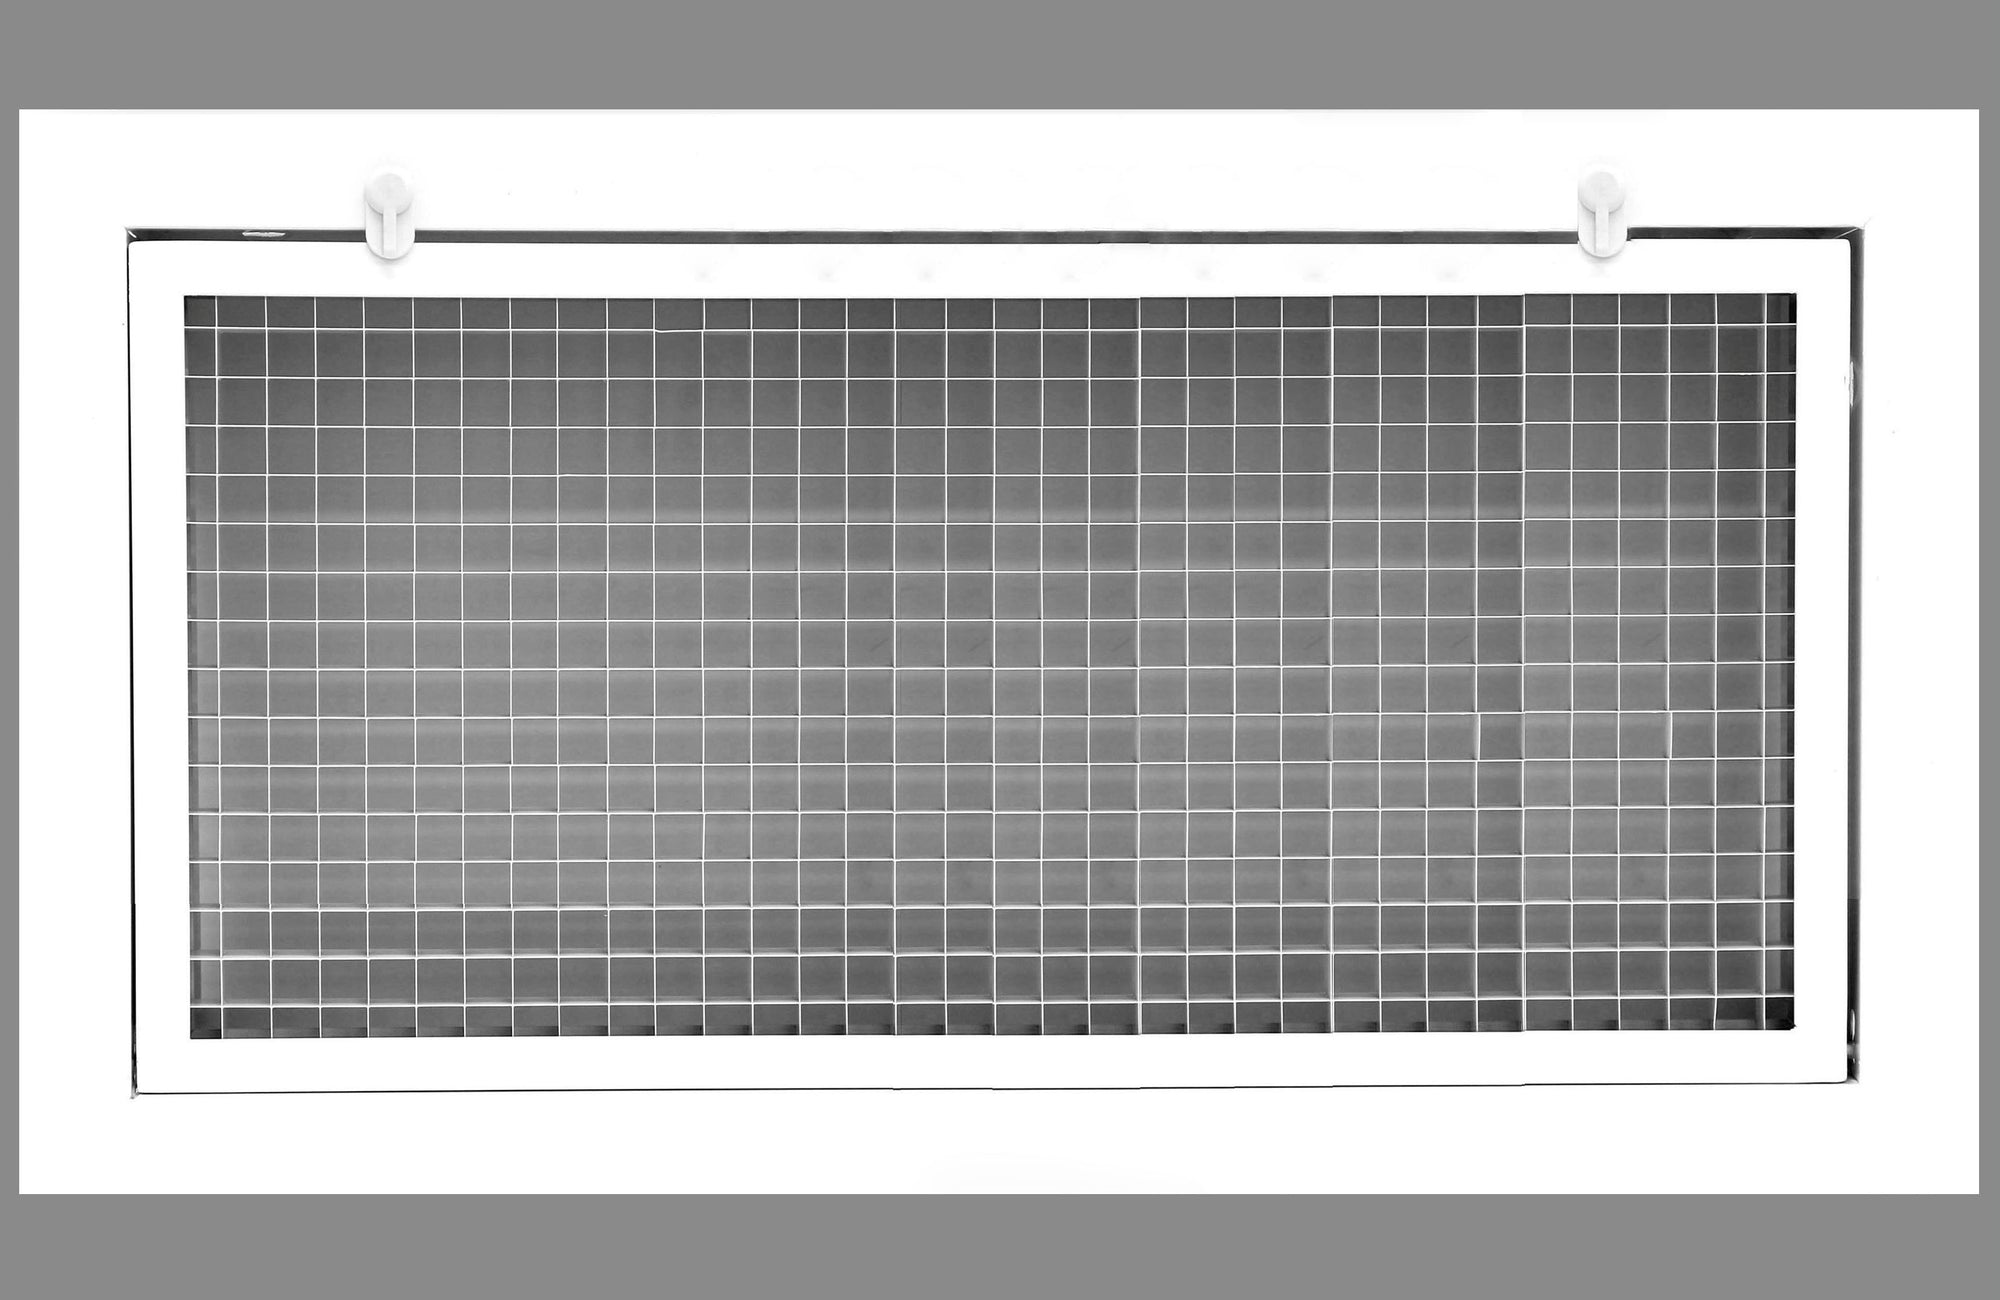 20" x 6" Cube Core Eggcrate Return Air Filter Grille for 1" Filter